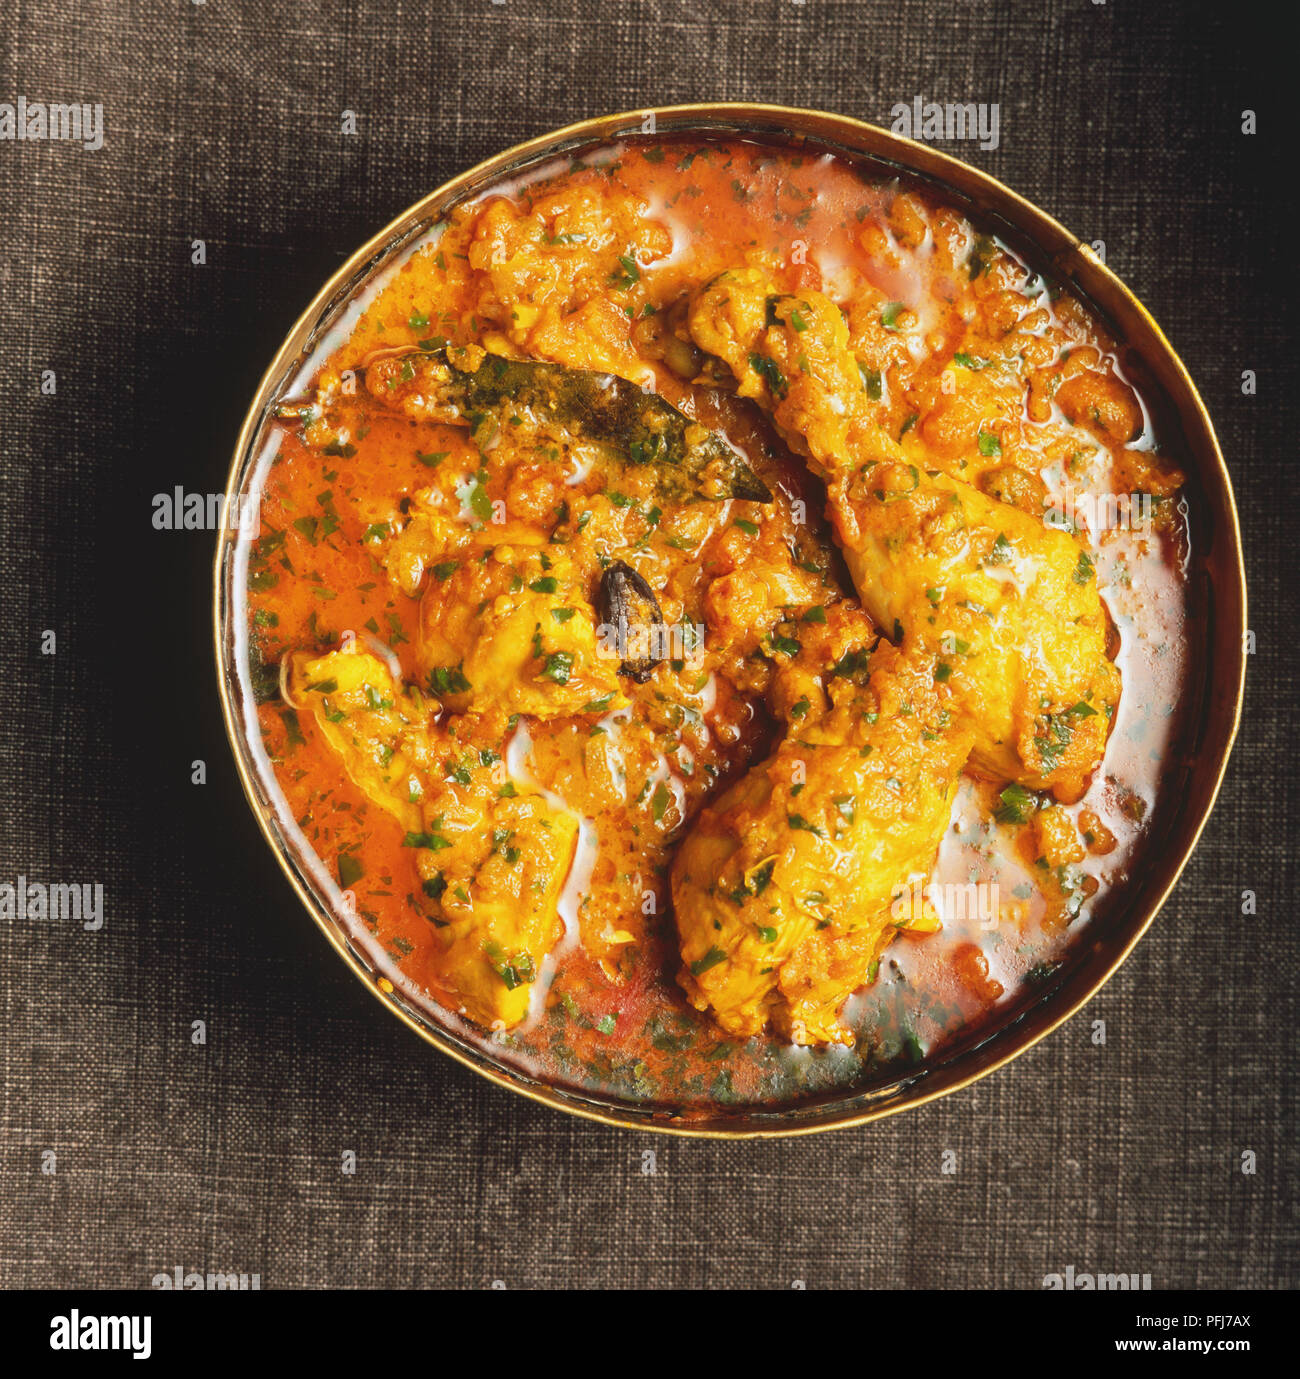 Desi murgh curry, large pan containing chicken wings, herbs, spices and red sauce, overhead view. Stock Photo